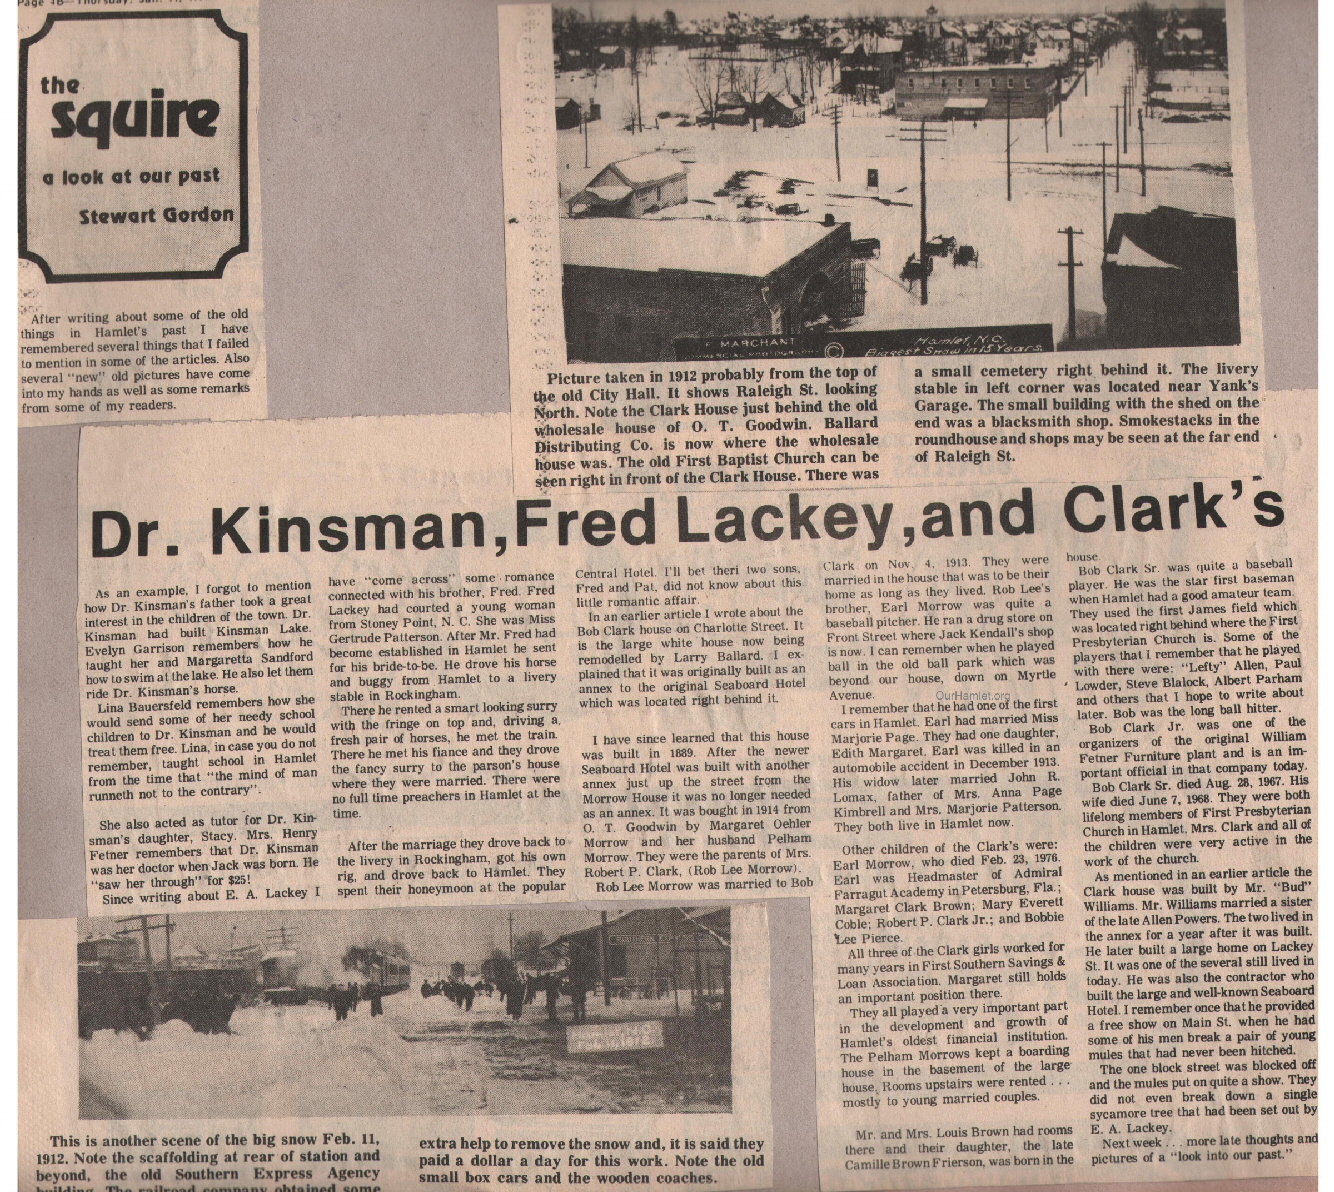 The Squire - Dr Kinsman, Fred Lackey, and Clark's OH